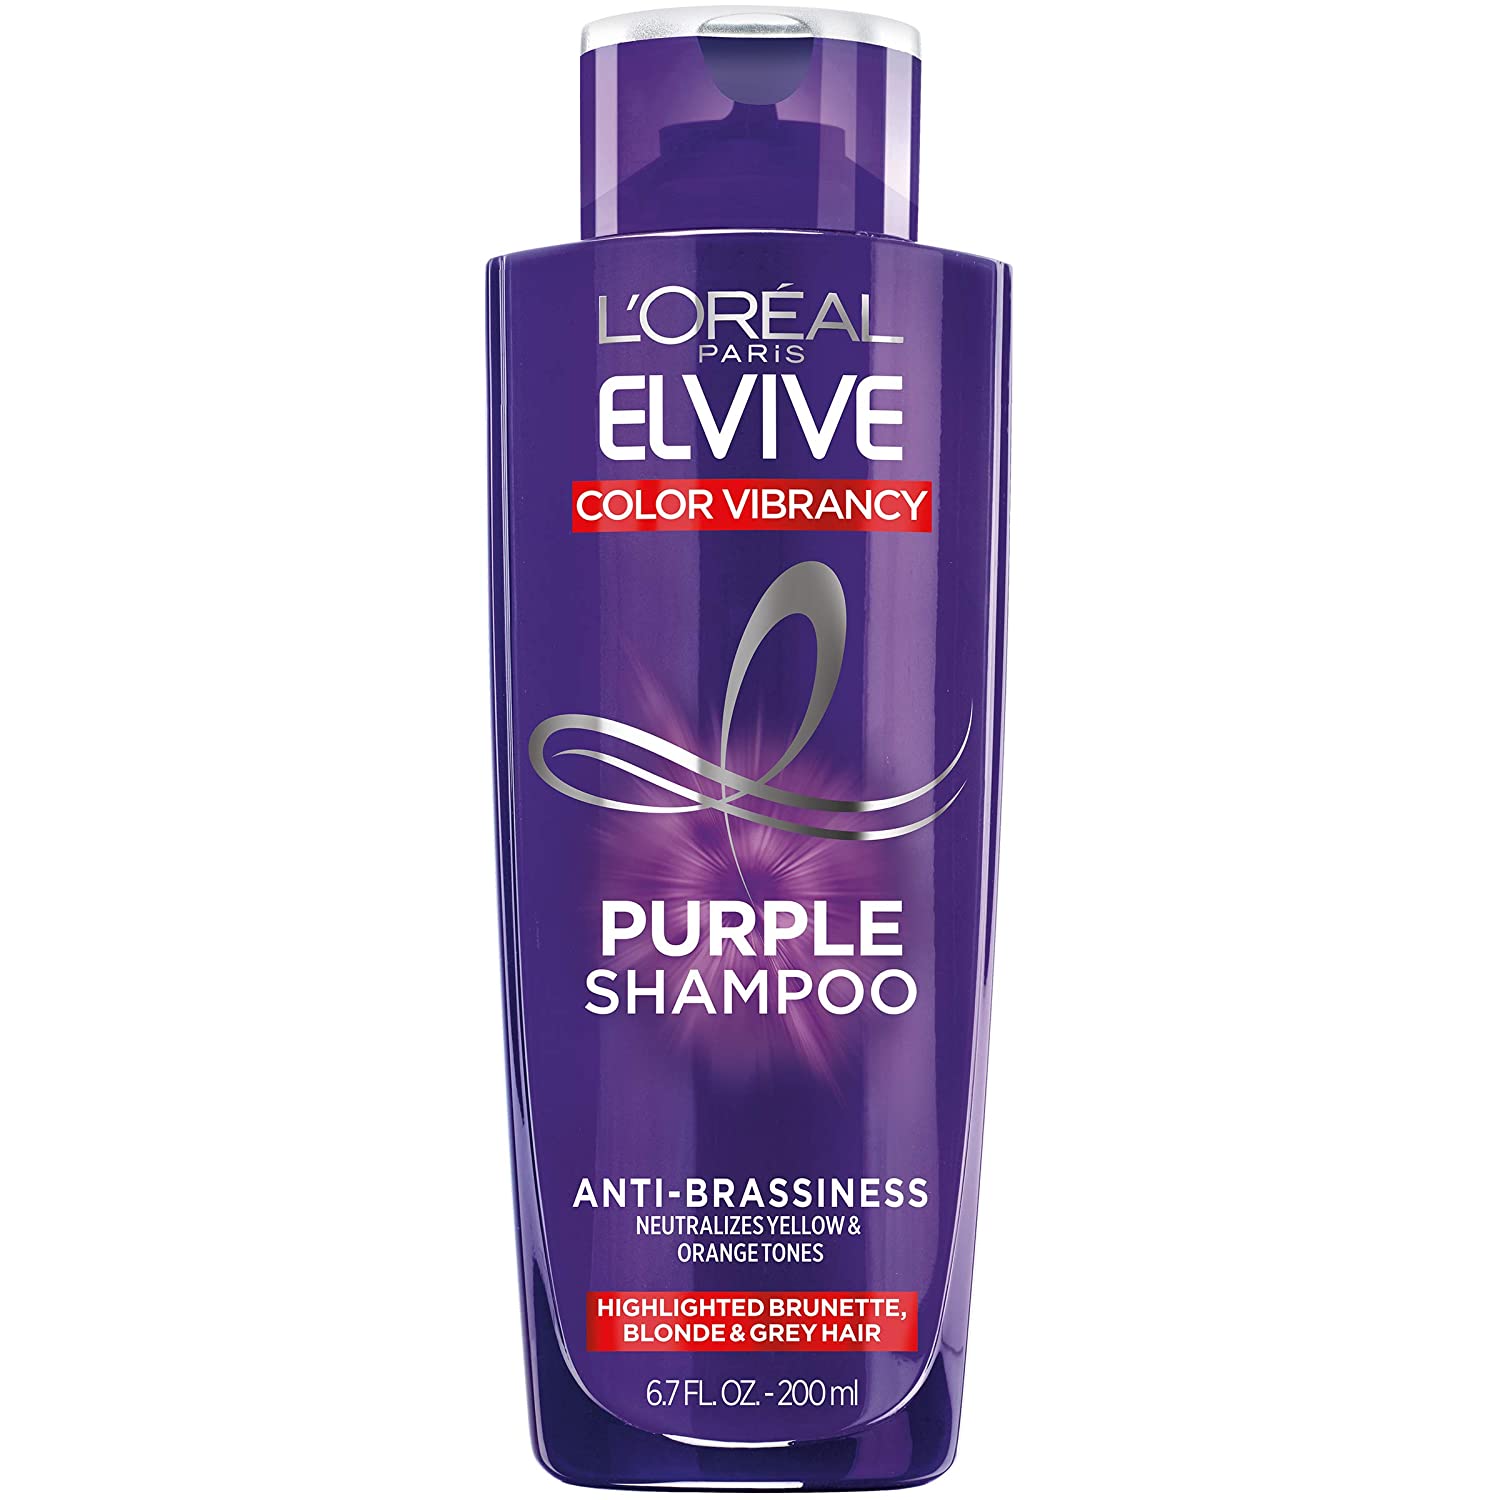 L'Oreal Paris Elvive Color Vibrancy Anti-Brassiness Purple Shampoo for Color Treated Hair, neutralizes Yellow & Orange Tones, Highlighted Brunette